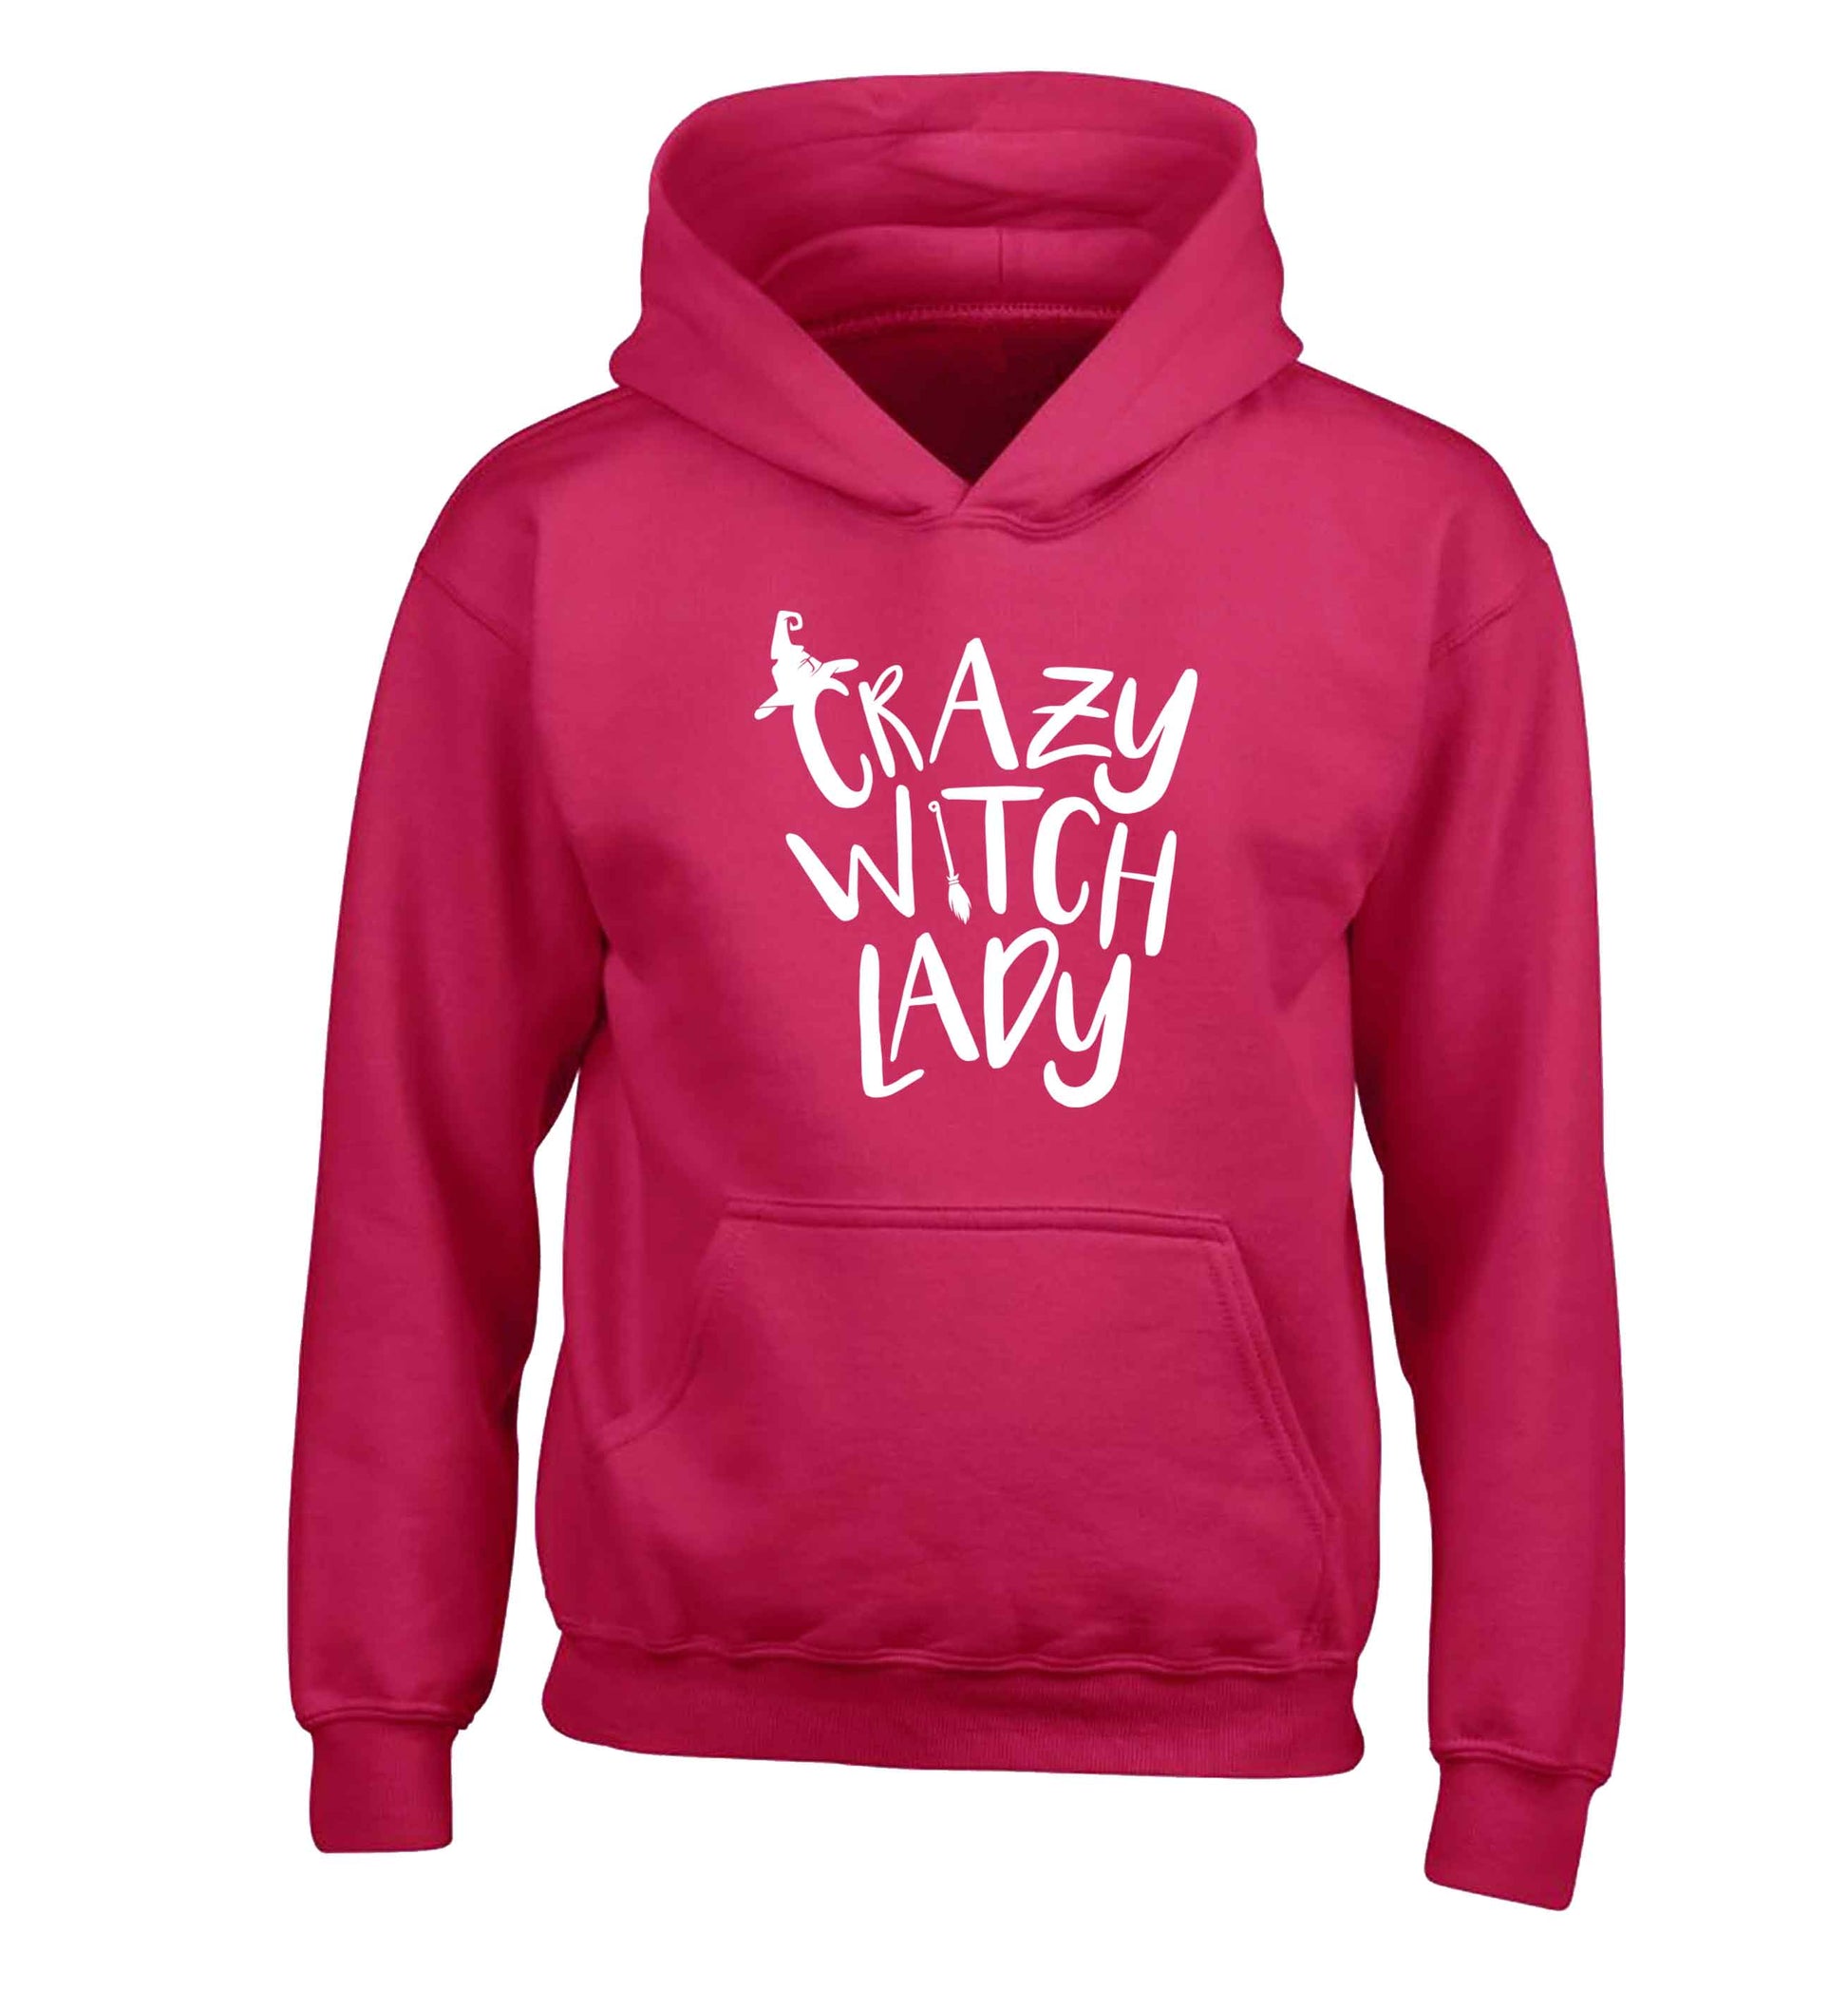 Crazy witch lady children's pink hoodie 12-13 Years